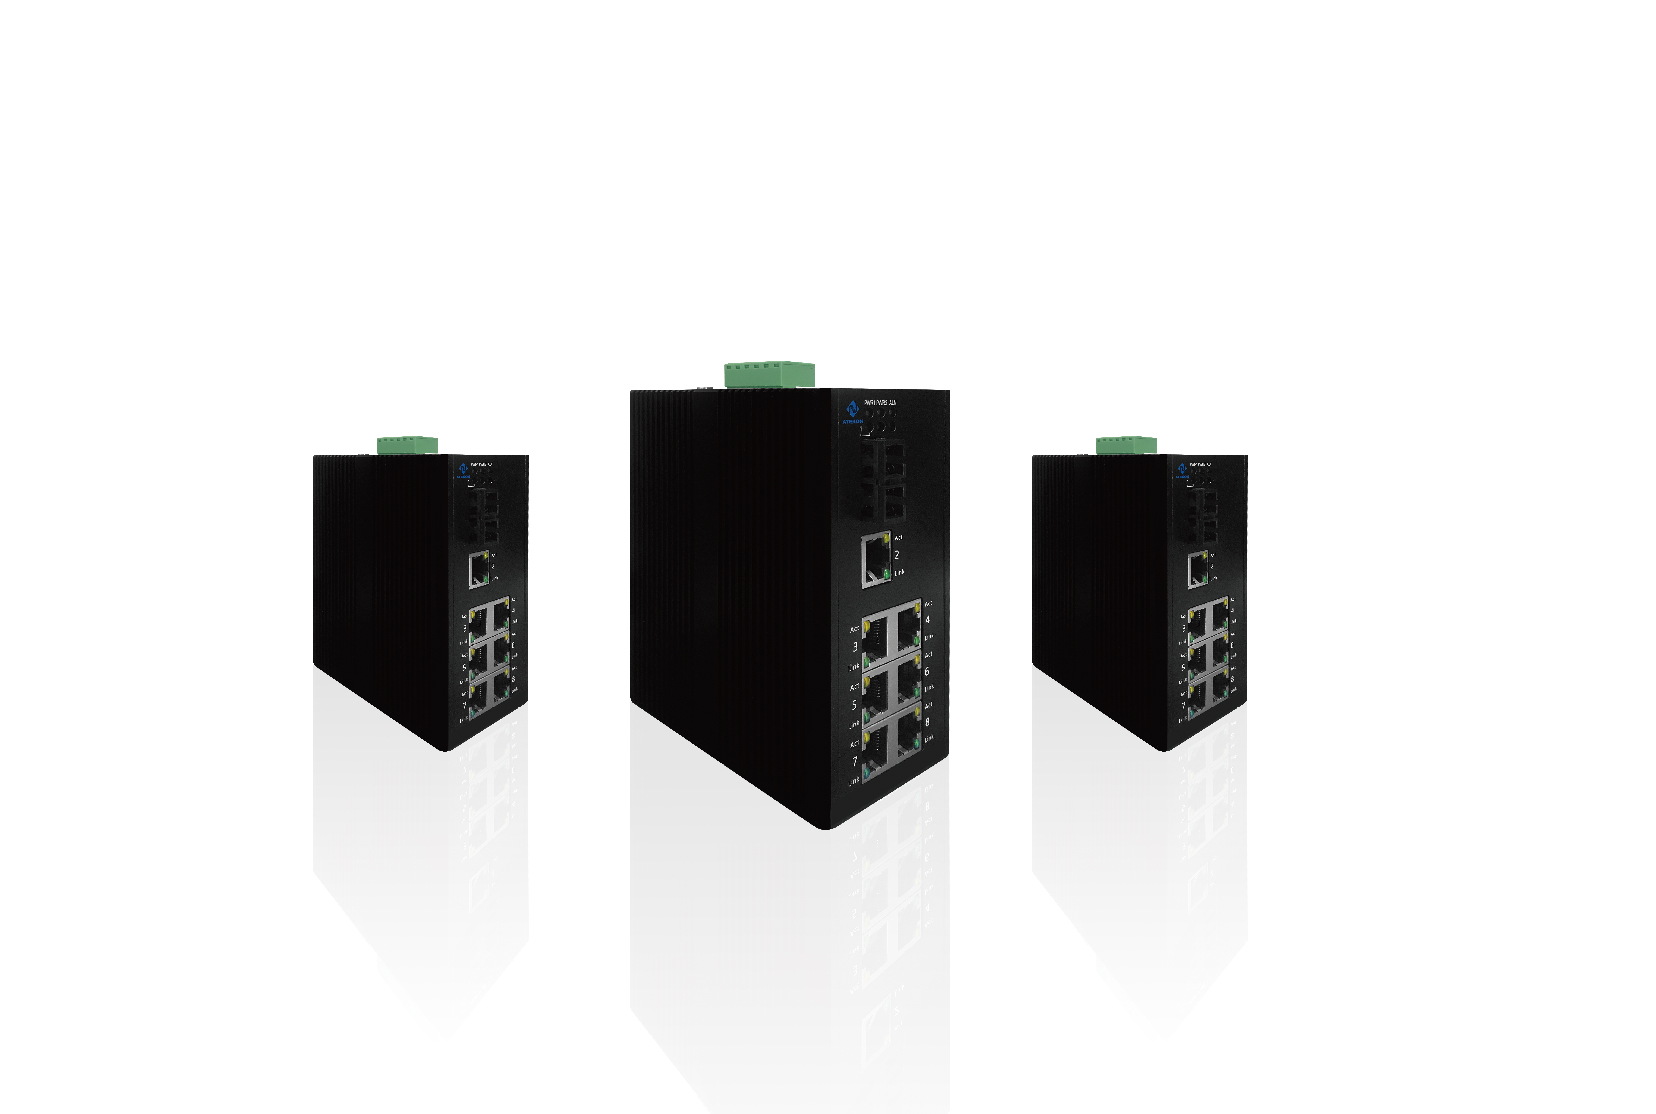 Industrial-grade unmanaged switches